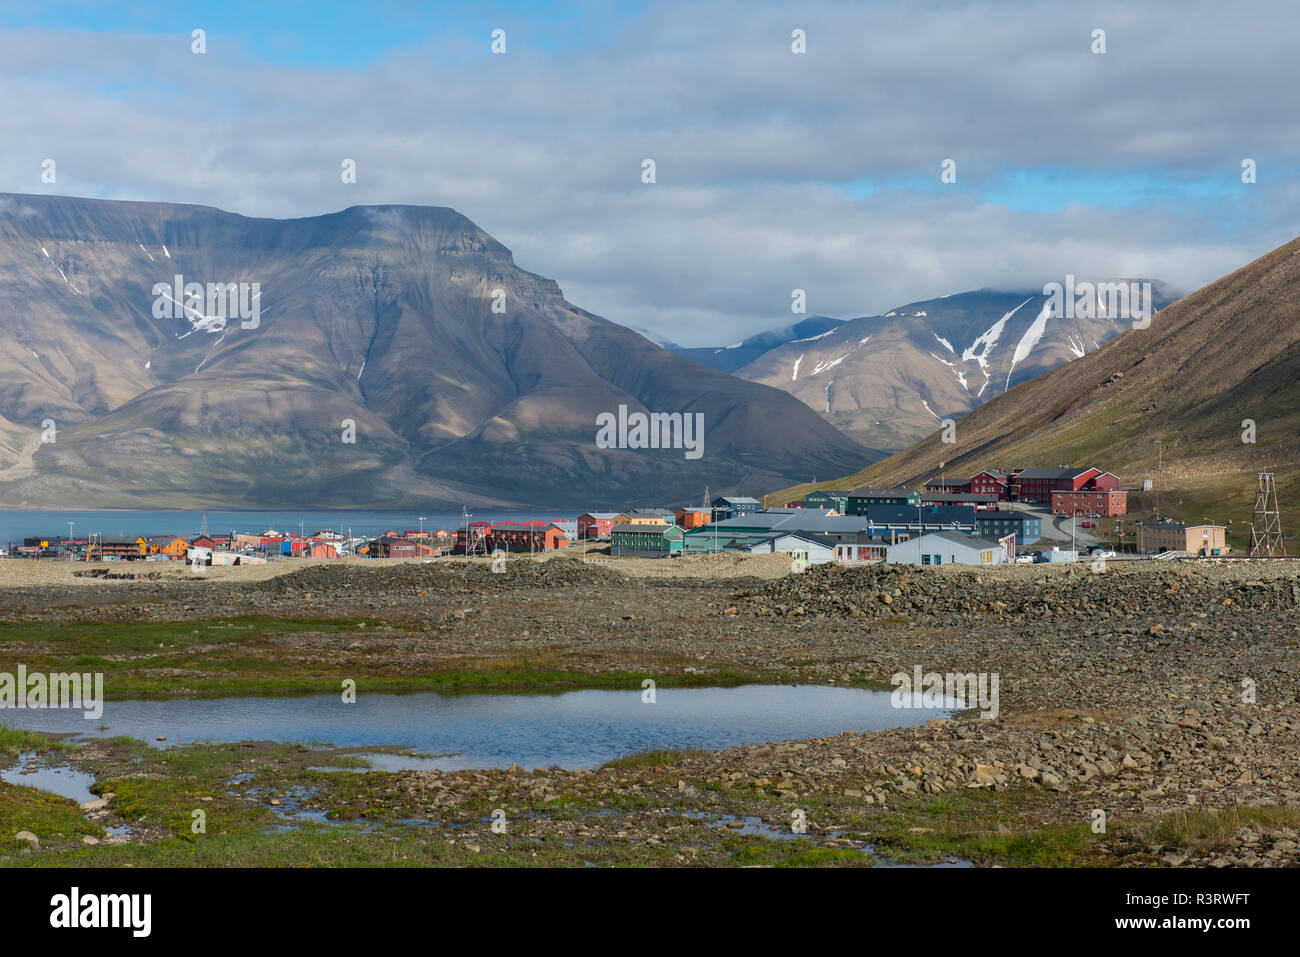 Norway, Spitsbergen. Scenic overview of the capital city of Longyearbyen. Stock Photo